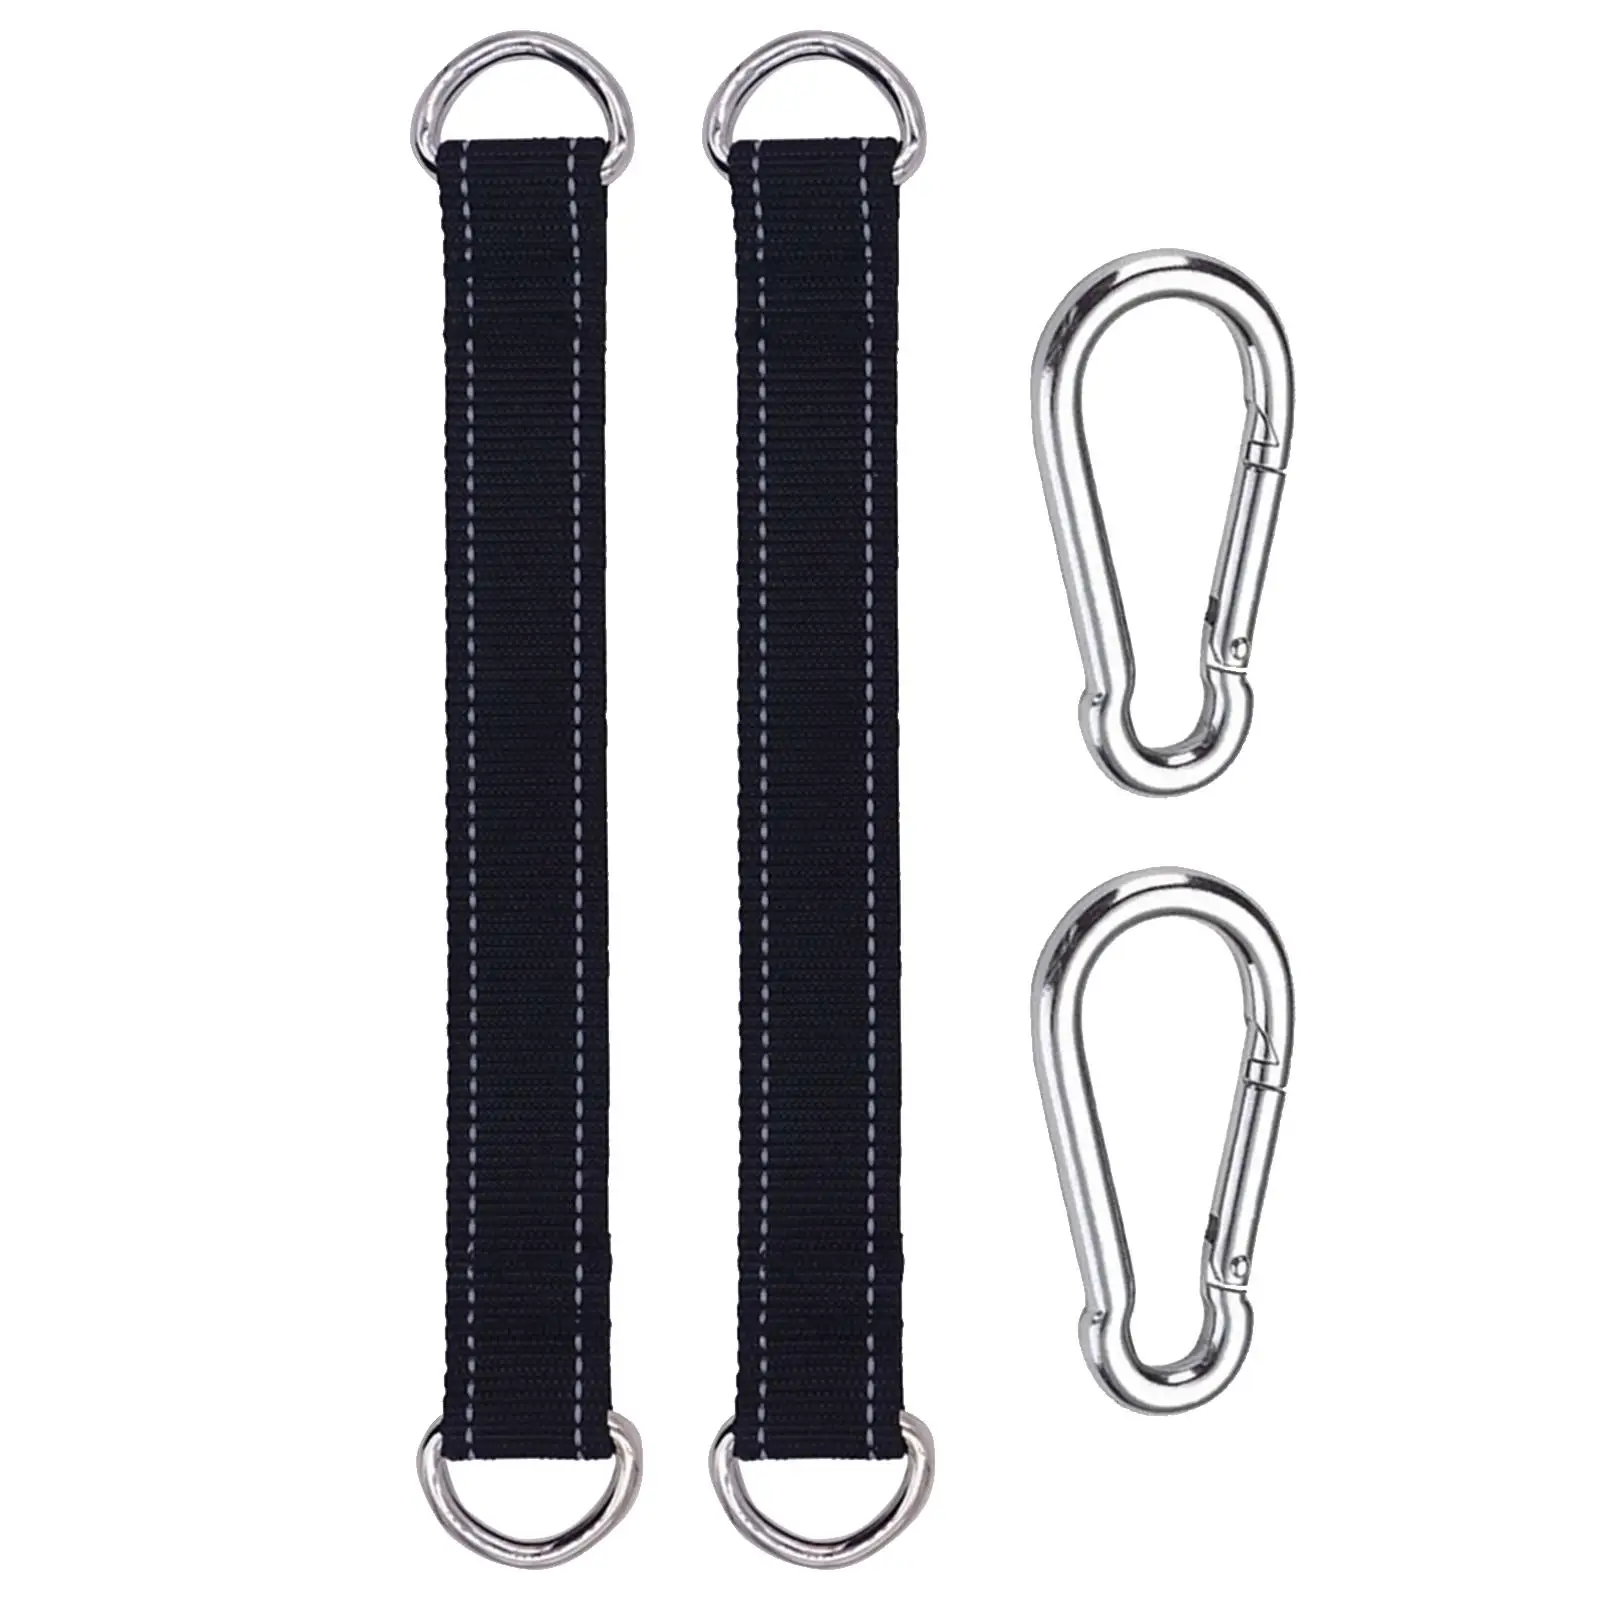 Straps 2 Set Heavy Duty Holds 2000lbs with Lock Snap Hooks Carabiners